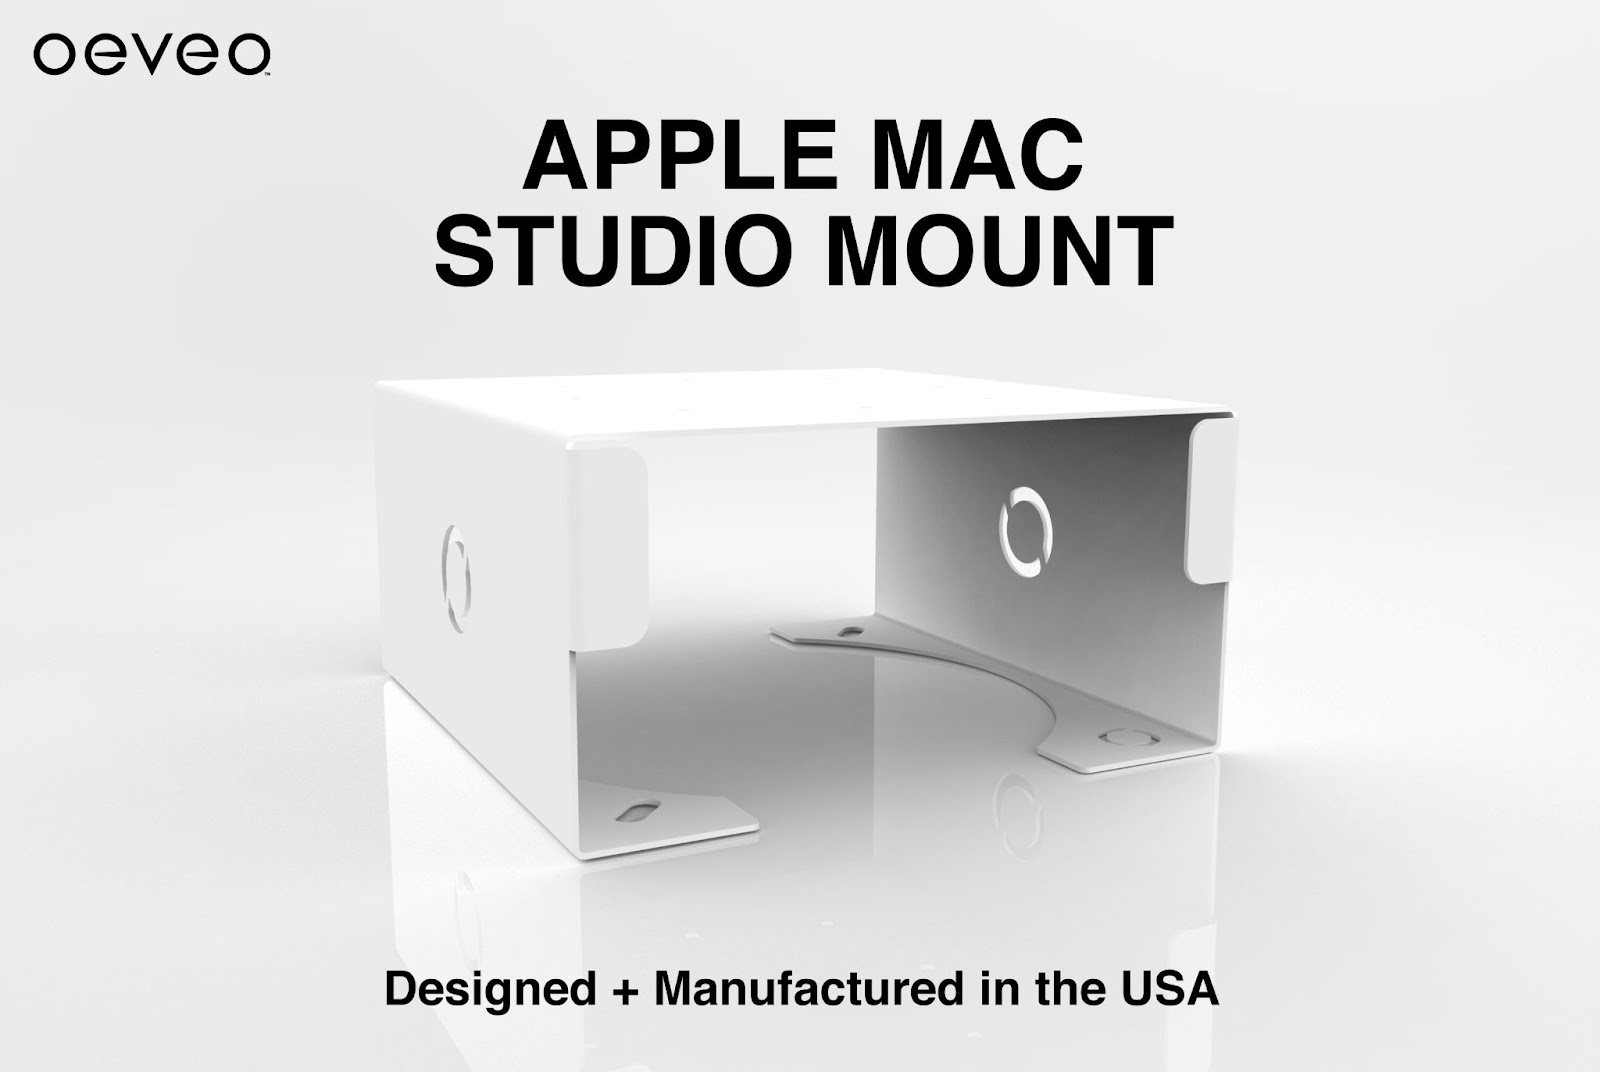 American-Made Mount, Designed by Oeveo for your treasured Mac Studio